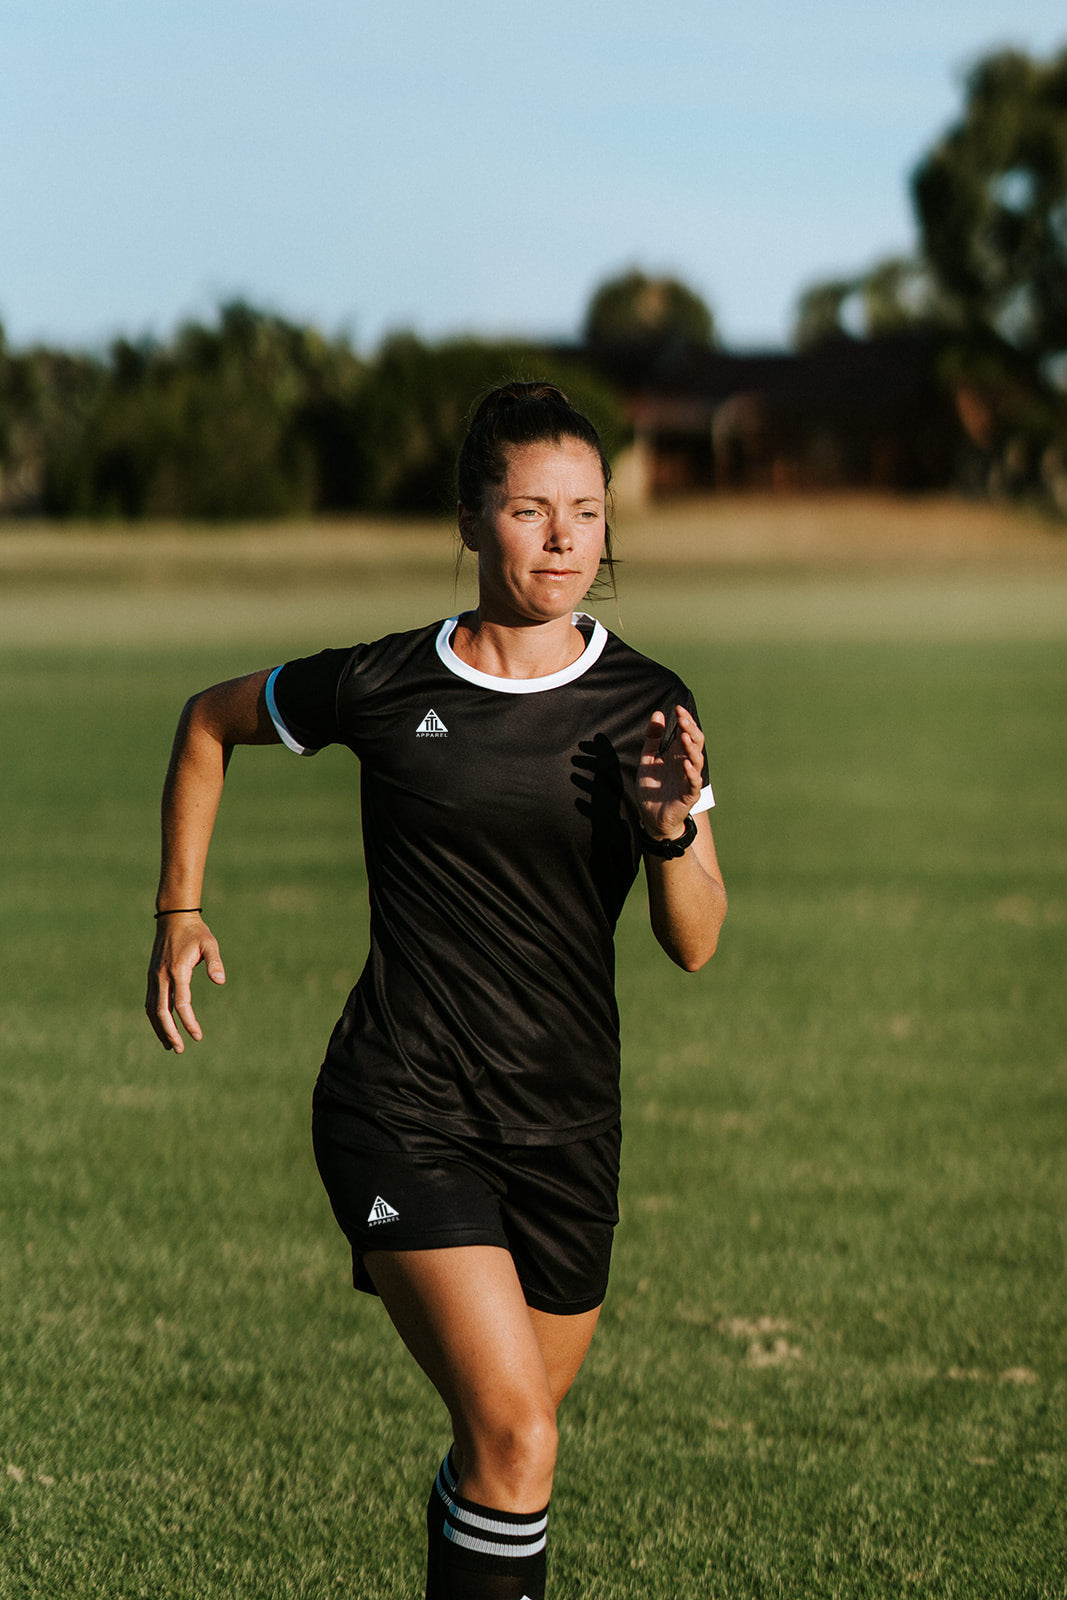 Women's cut football / training gear made and designed to fit women's form. Designed and made in Australia from breathable flexible recycled material. 